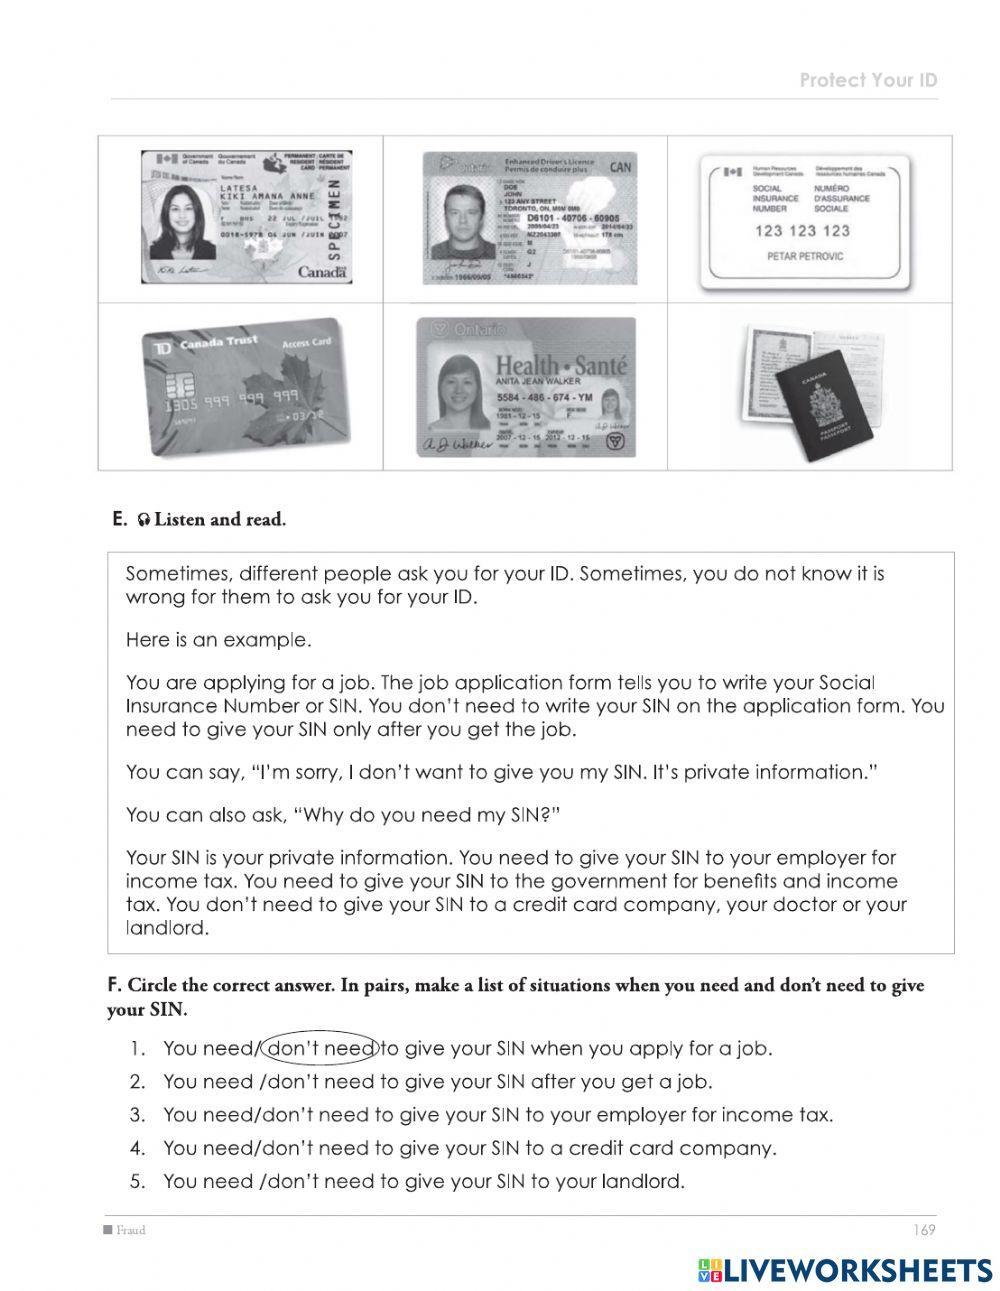 Protect your ID